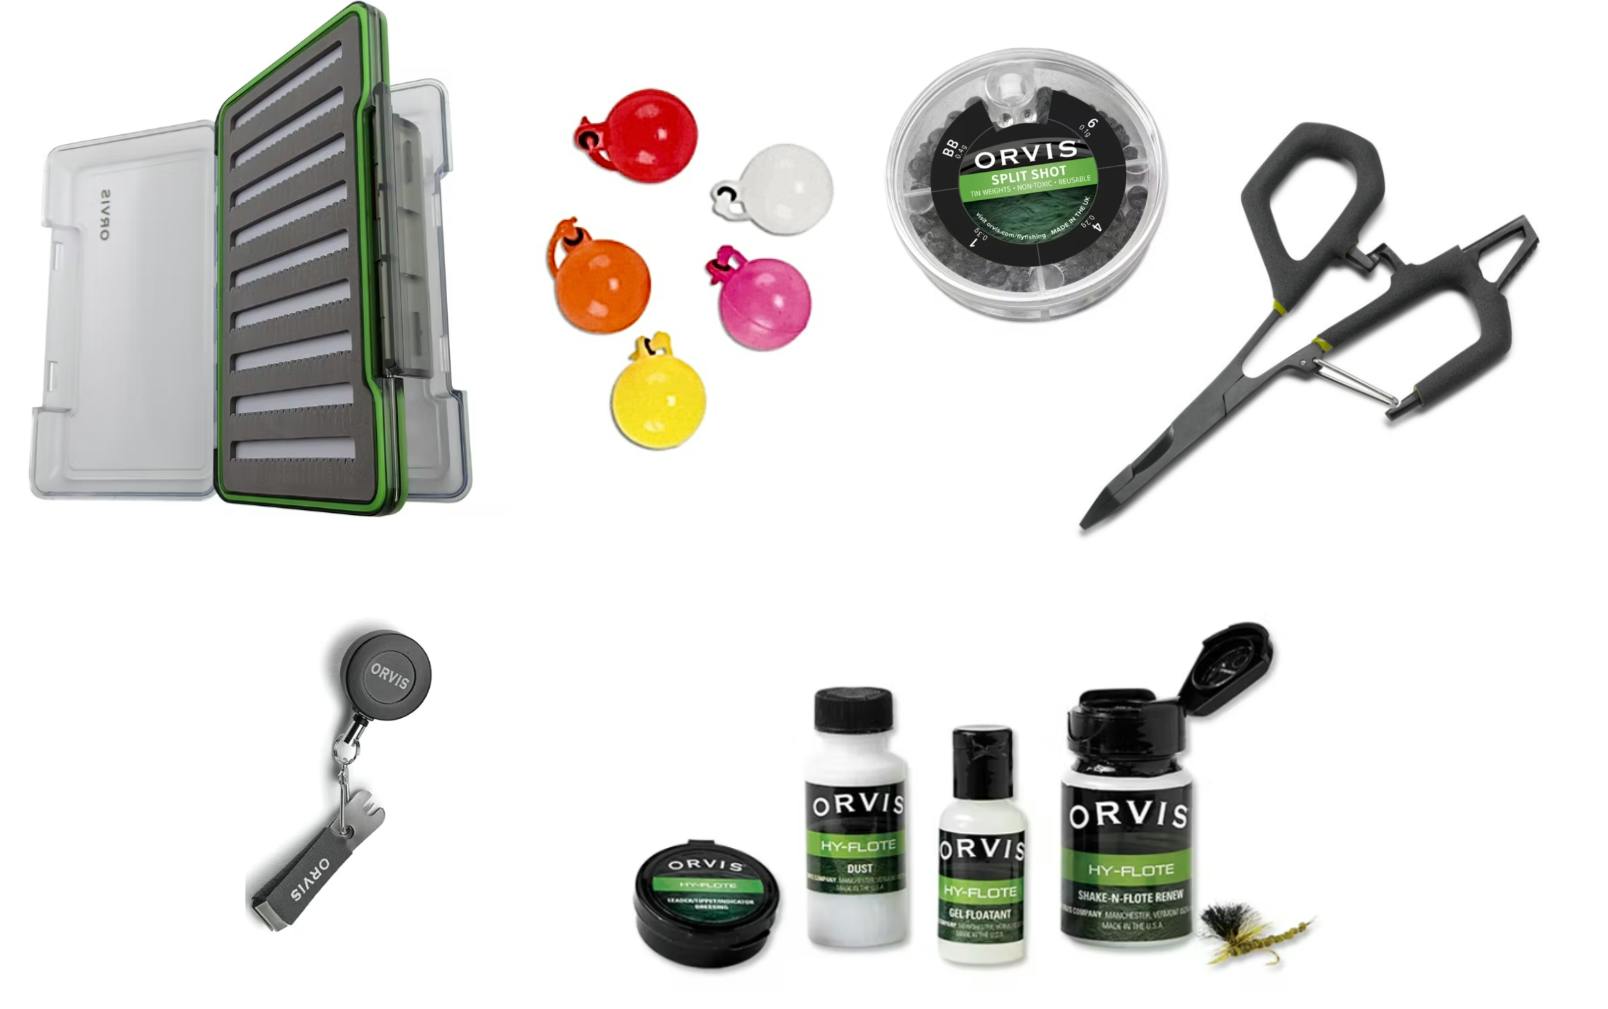 Fly fishing accessories. On the top row from left to right: The Orvis Double-Sided Fly Box, Indicators, the Orvis Split Shot Weights, and the Orvis Flow Hemos. On the bottom row from left to right is the the Orvis Comfy Grip Nipper/Zinger Combo and the Orvis Bulk Floatant.